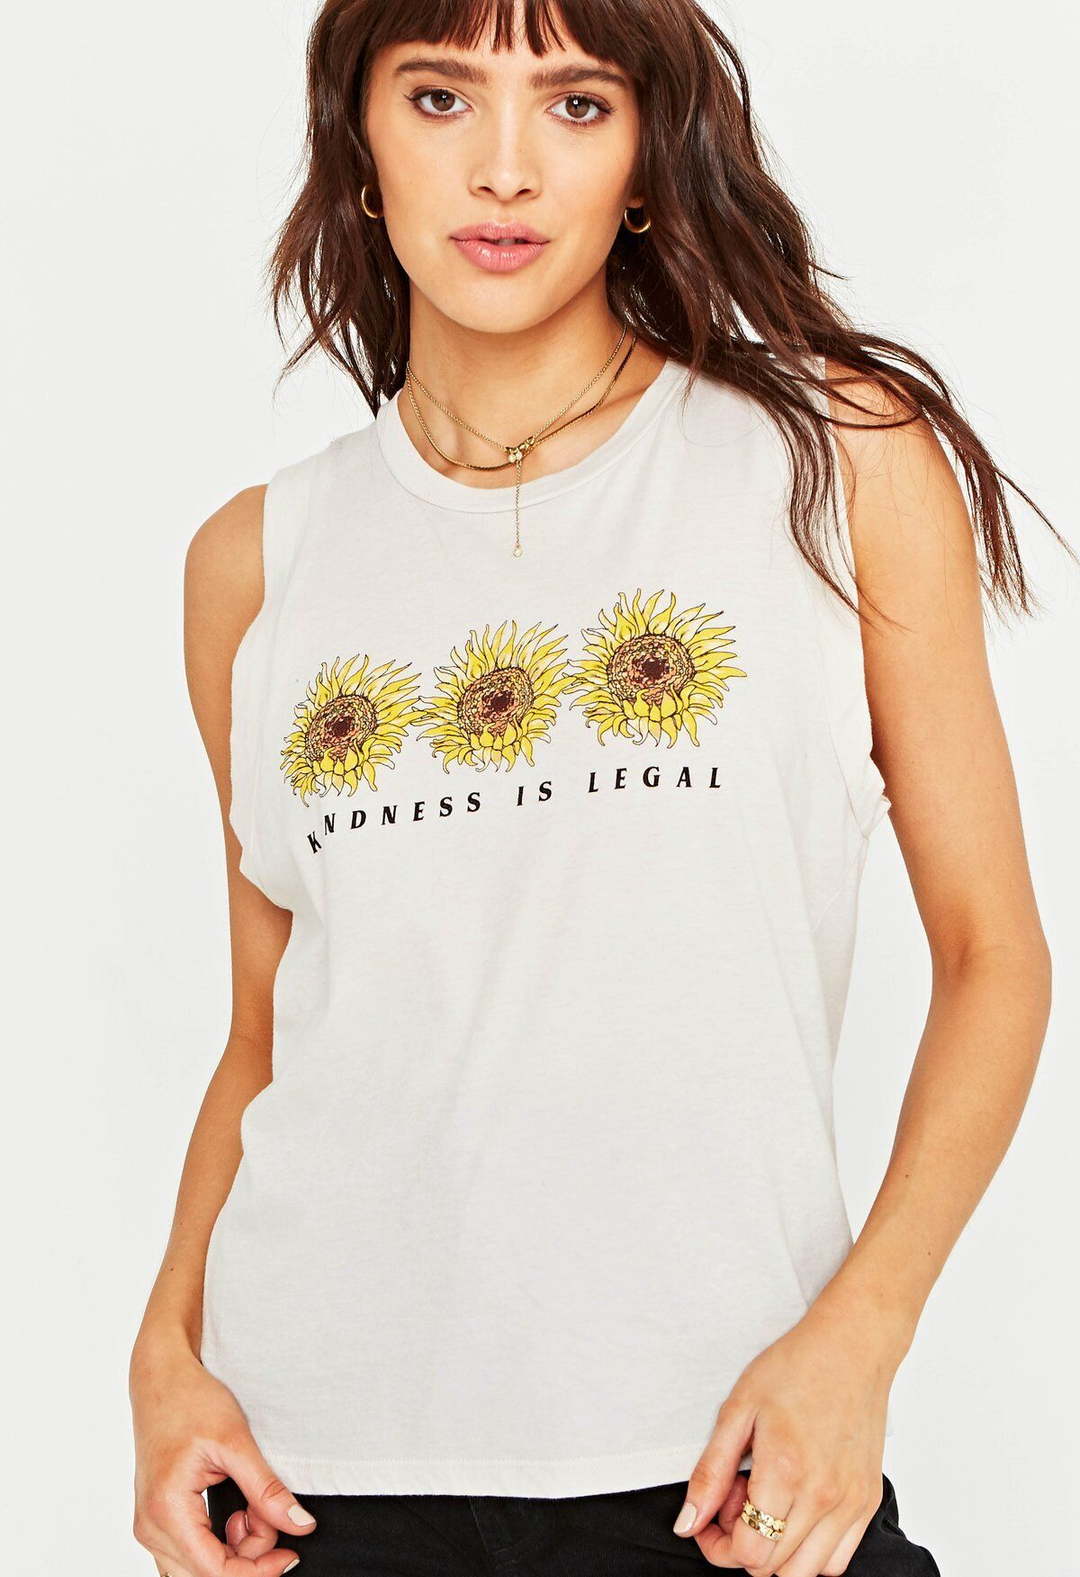 Kindness Is Legal Tank - Kingfisher Road - Online Boutique